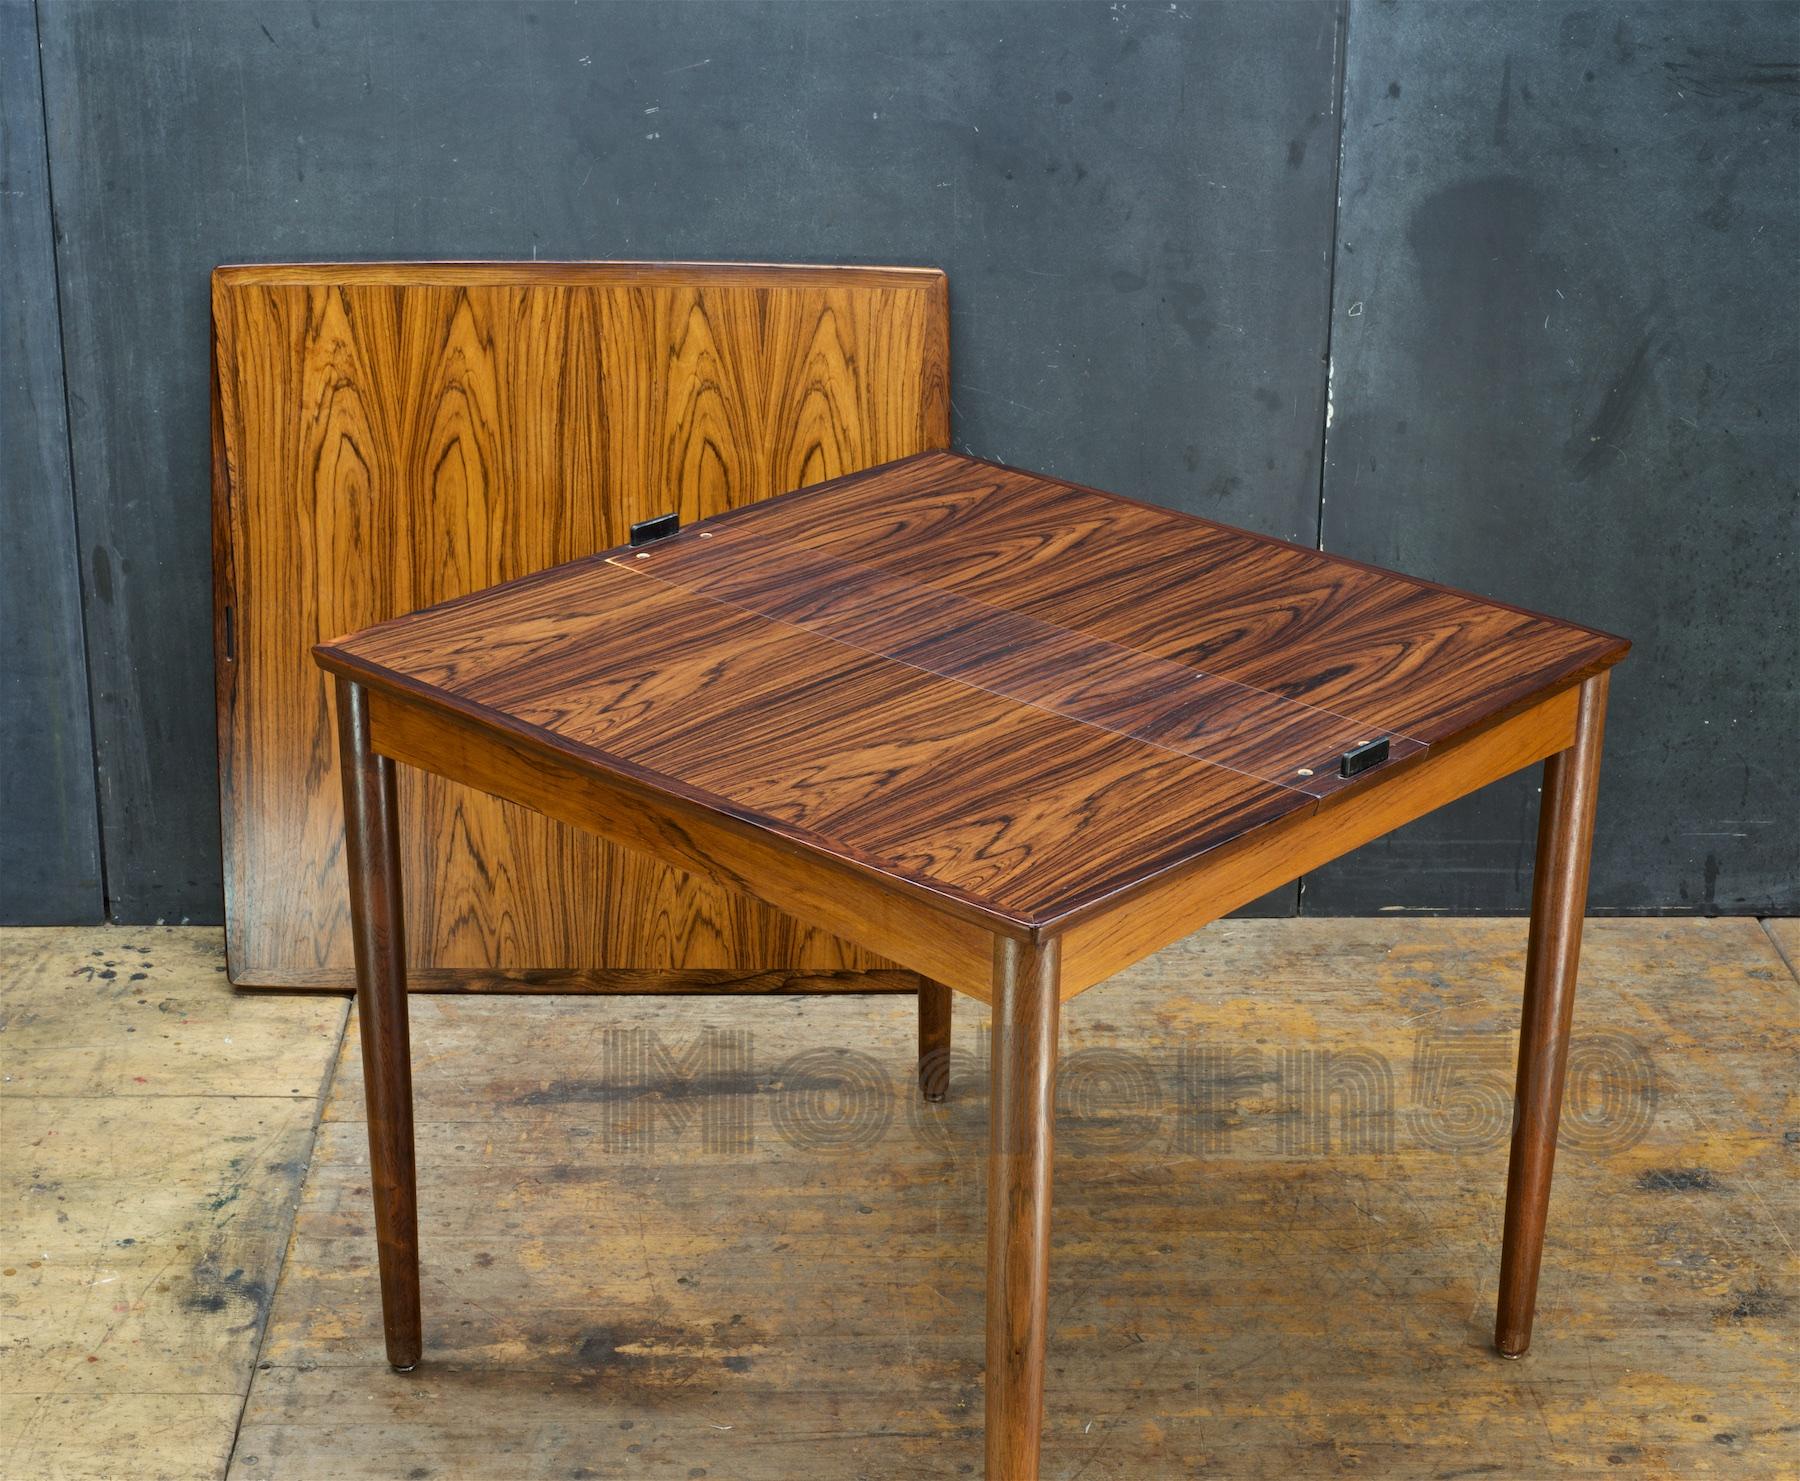 Lacquered 1960s Brazilian Rosewood Compact Danish Dining Table Midcentury Maximalist Apt